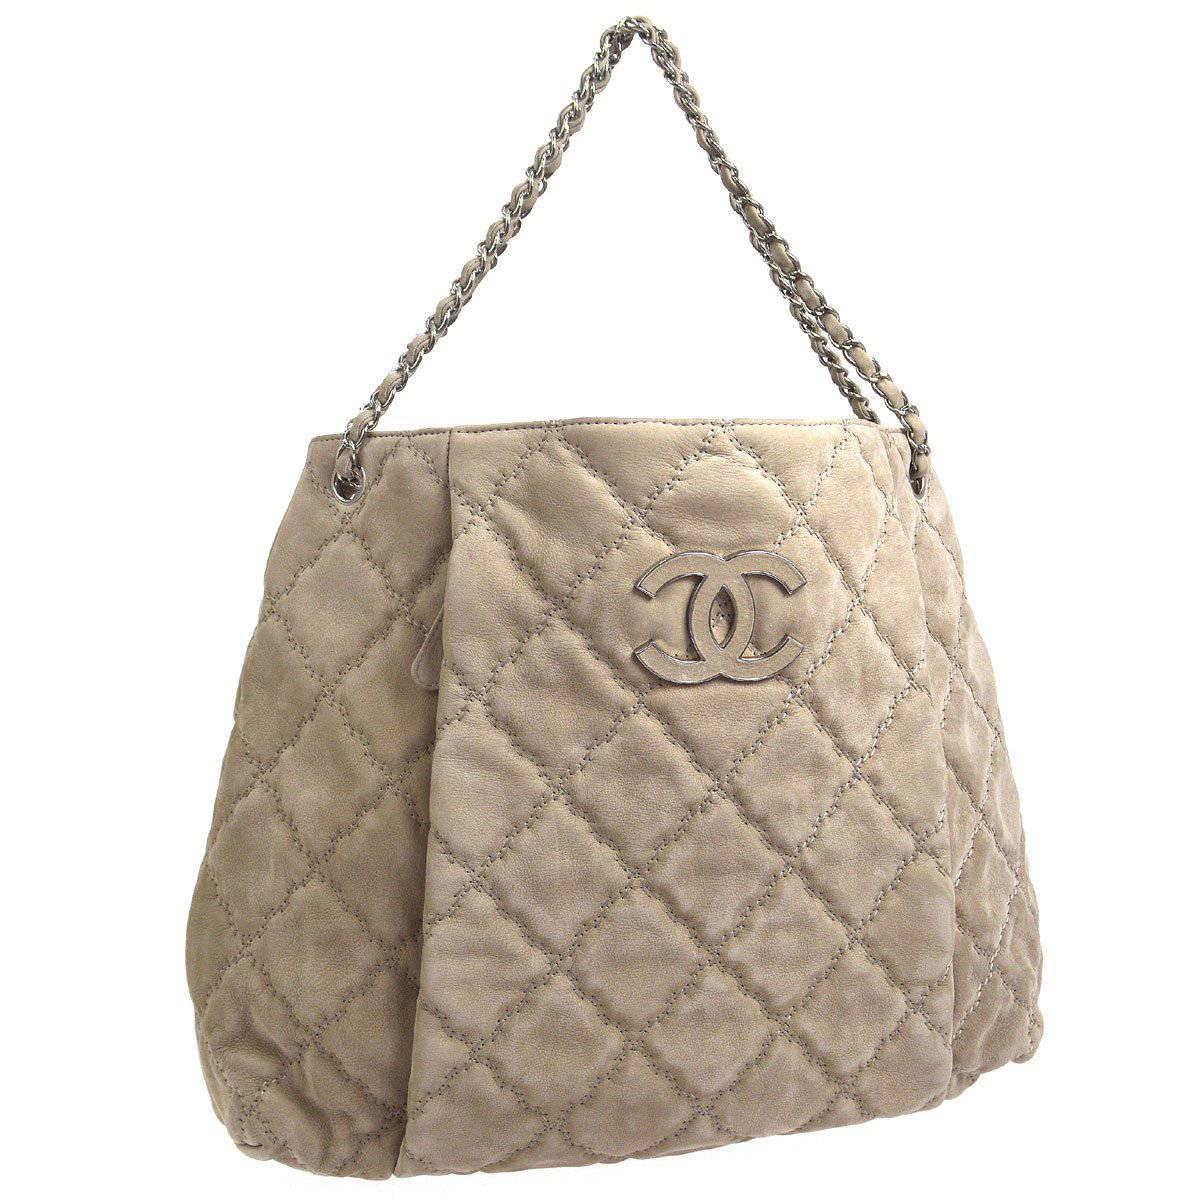 Chanel Nude Tan Suede Leather Silver Carryall Hobo Tote Shoulder Bag